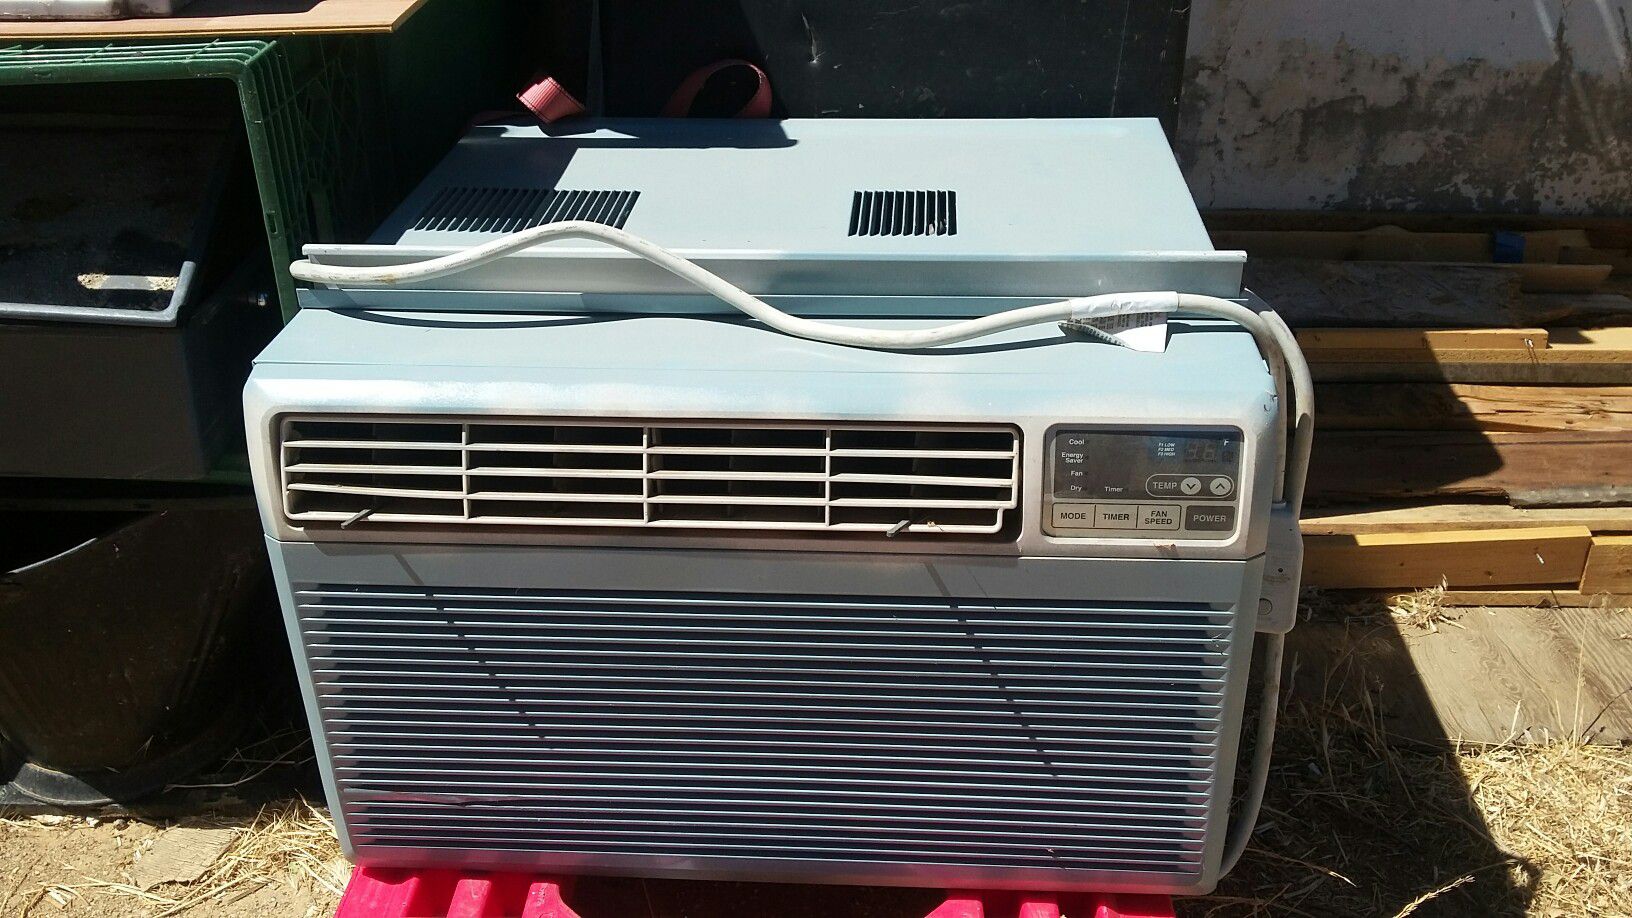 Air conditioning excellent condition